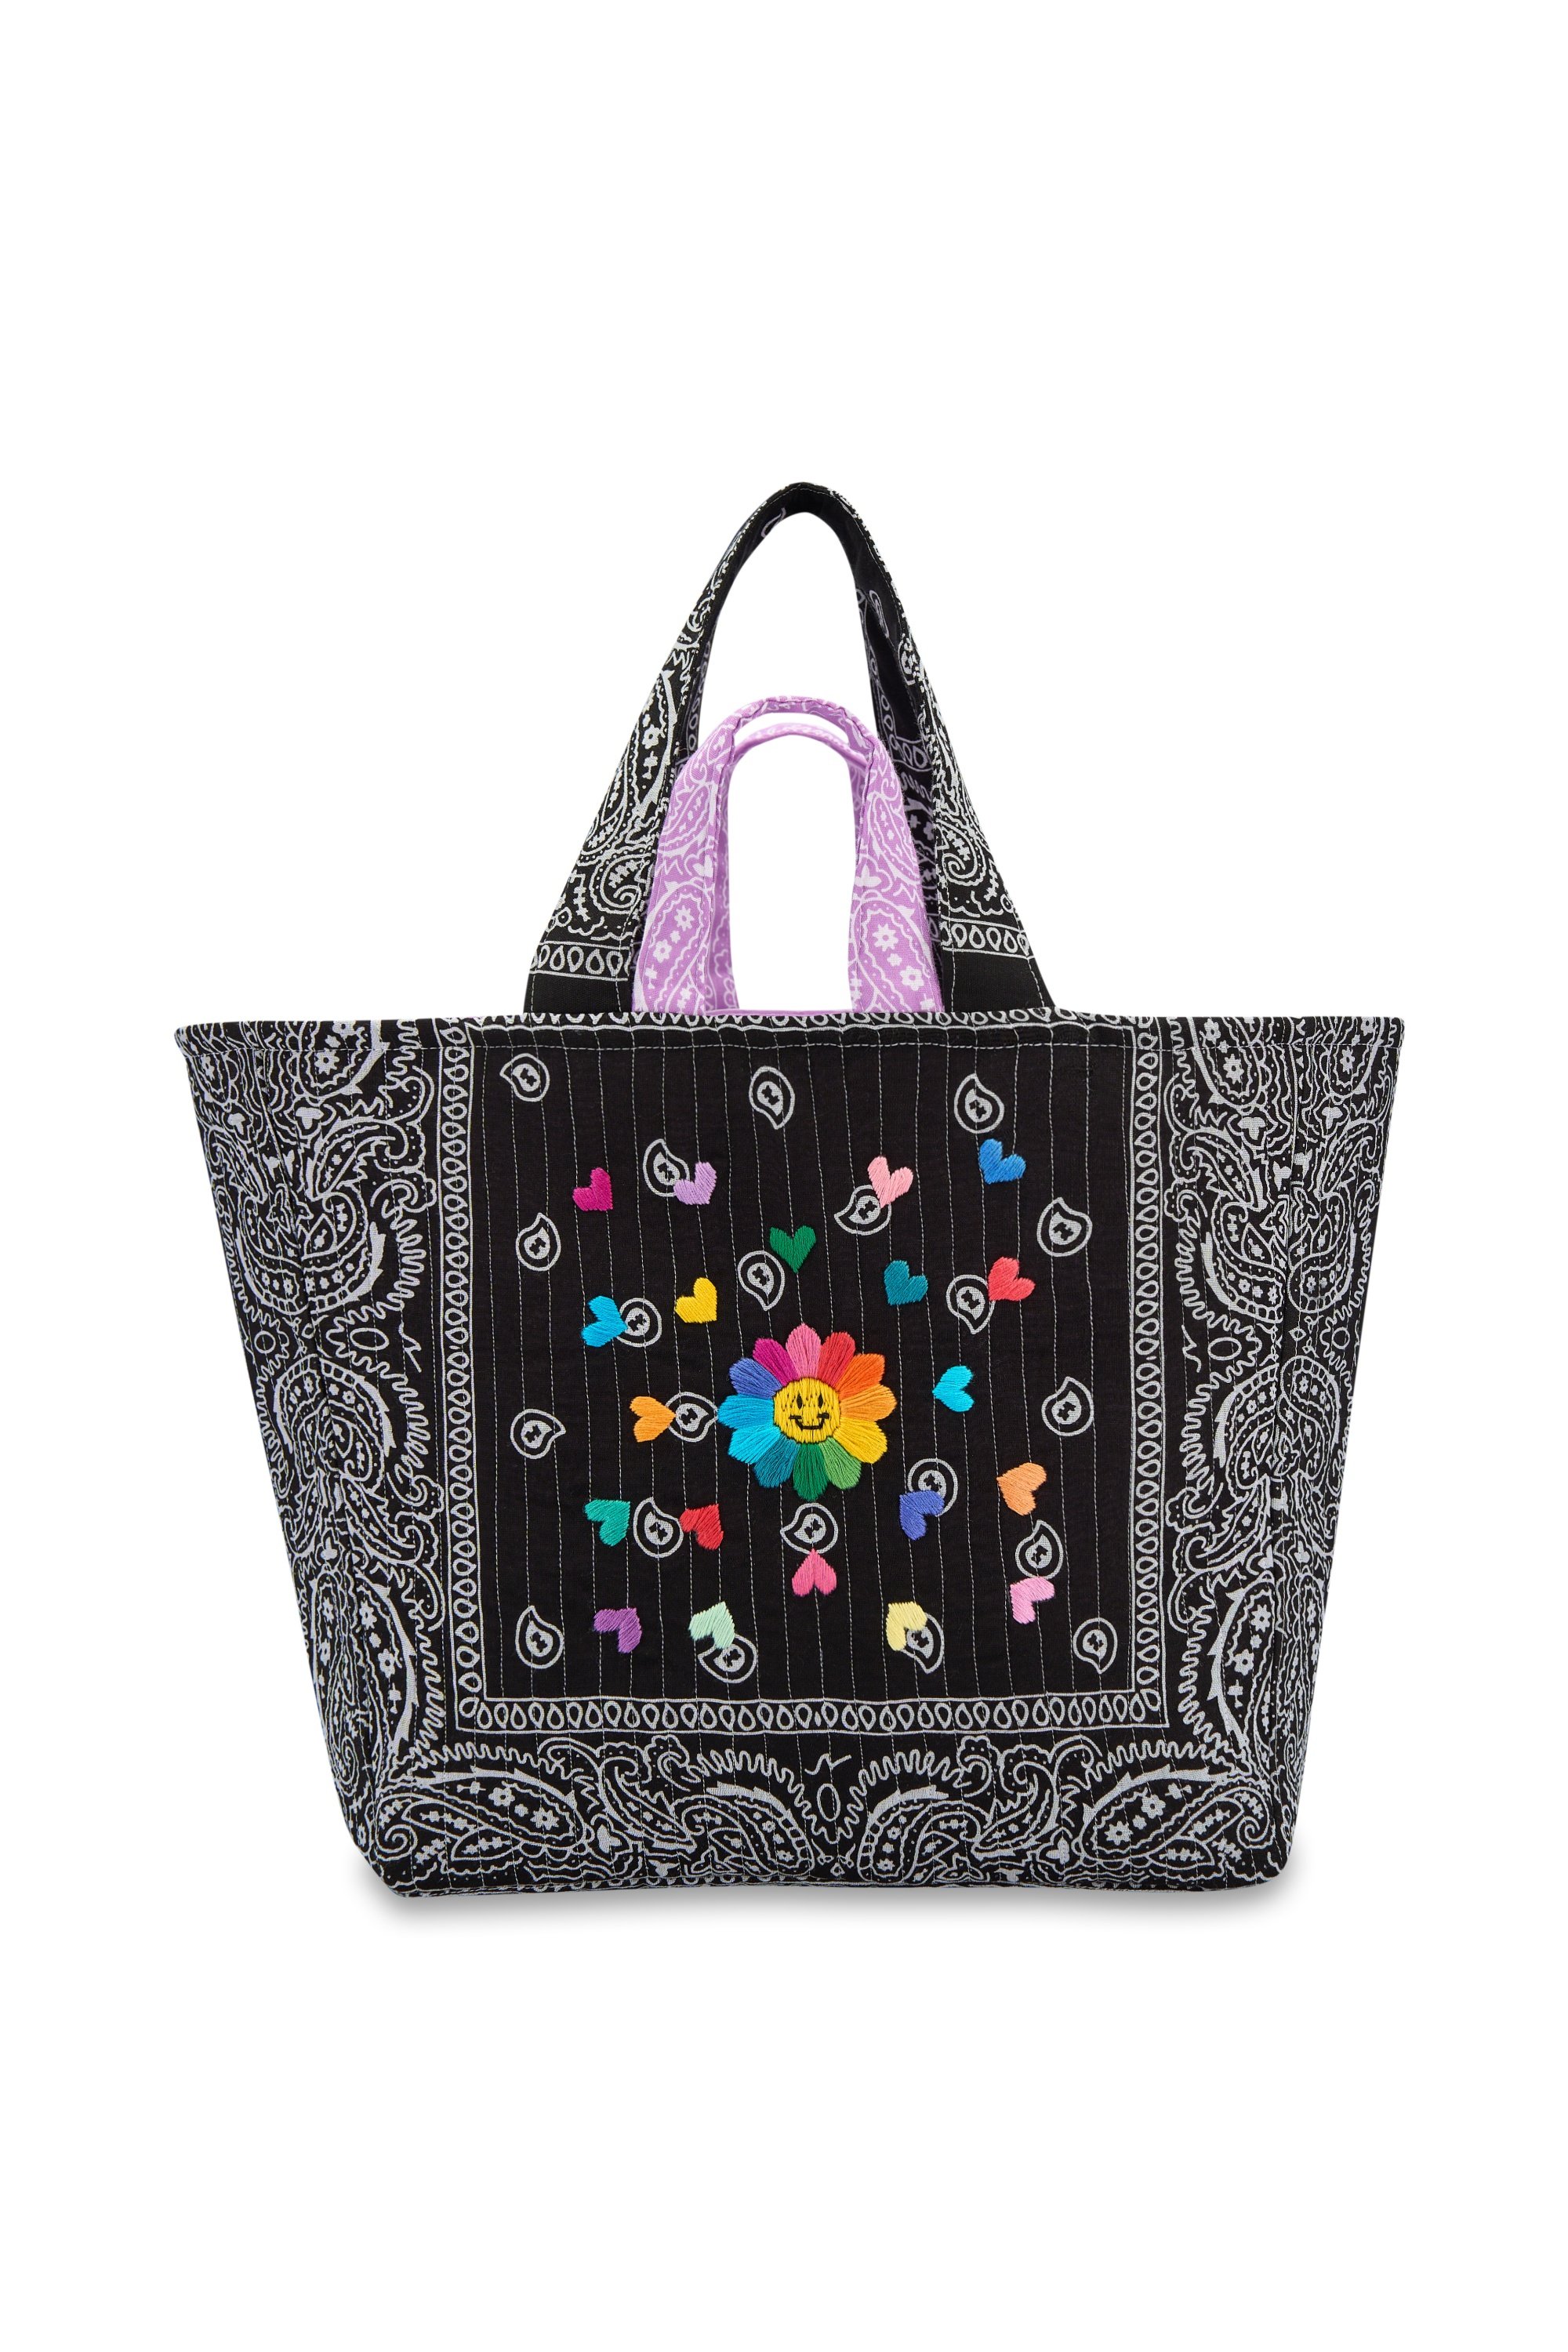 PERLA Quilted Maxi Tote Çanta - Siyah&Lila - SMILEY FLOWER